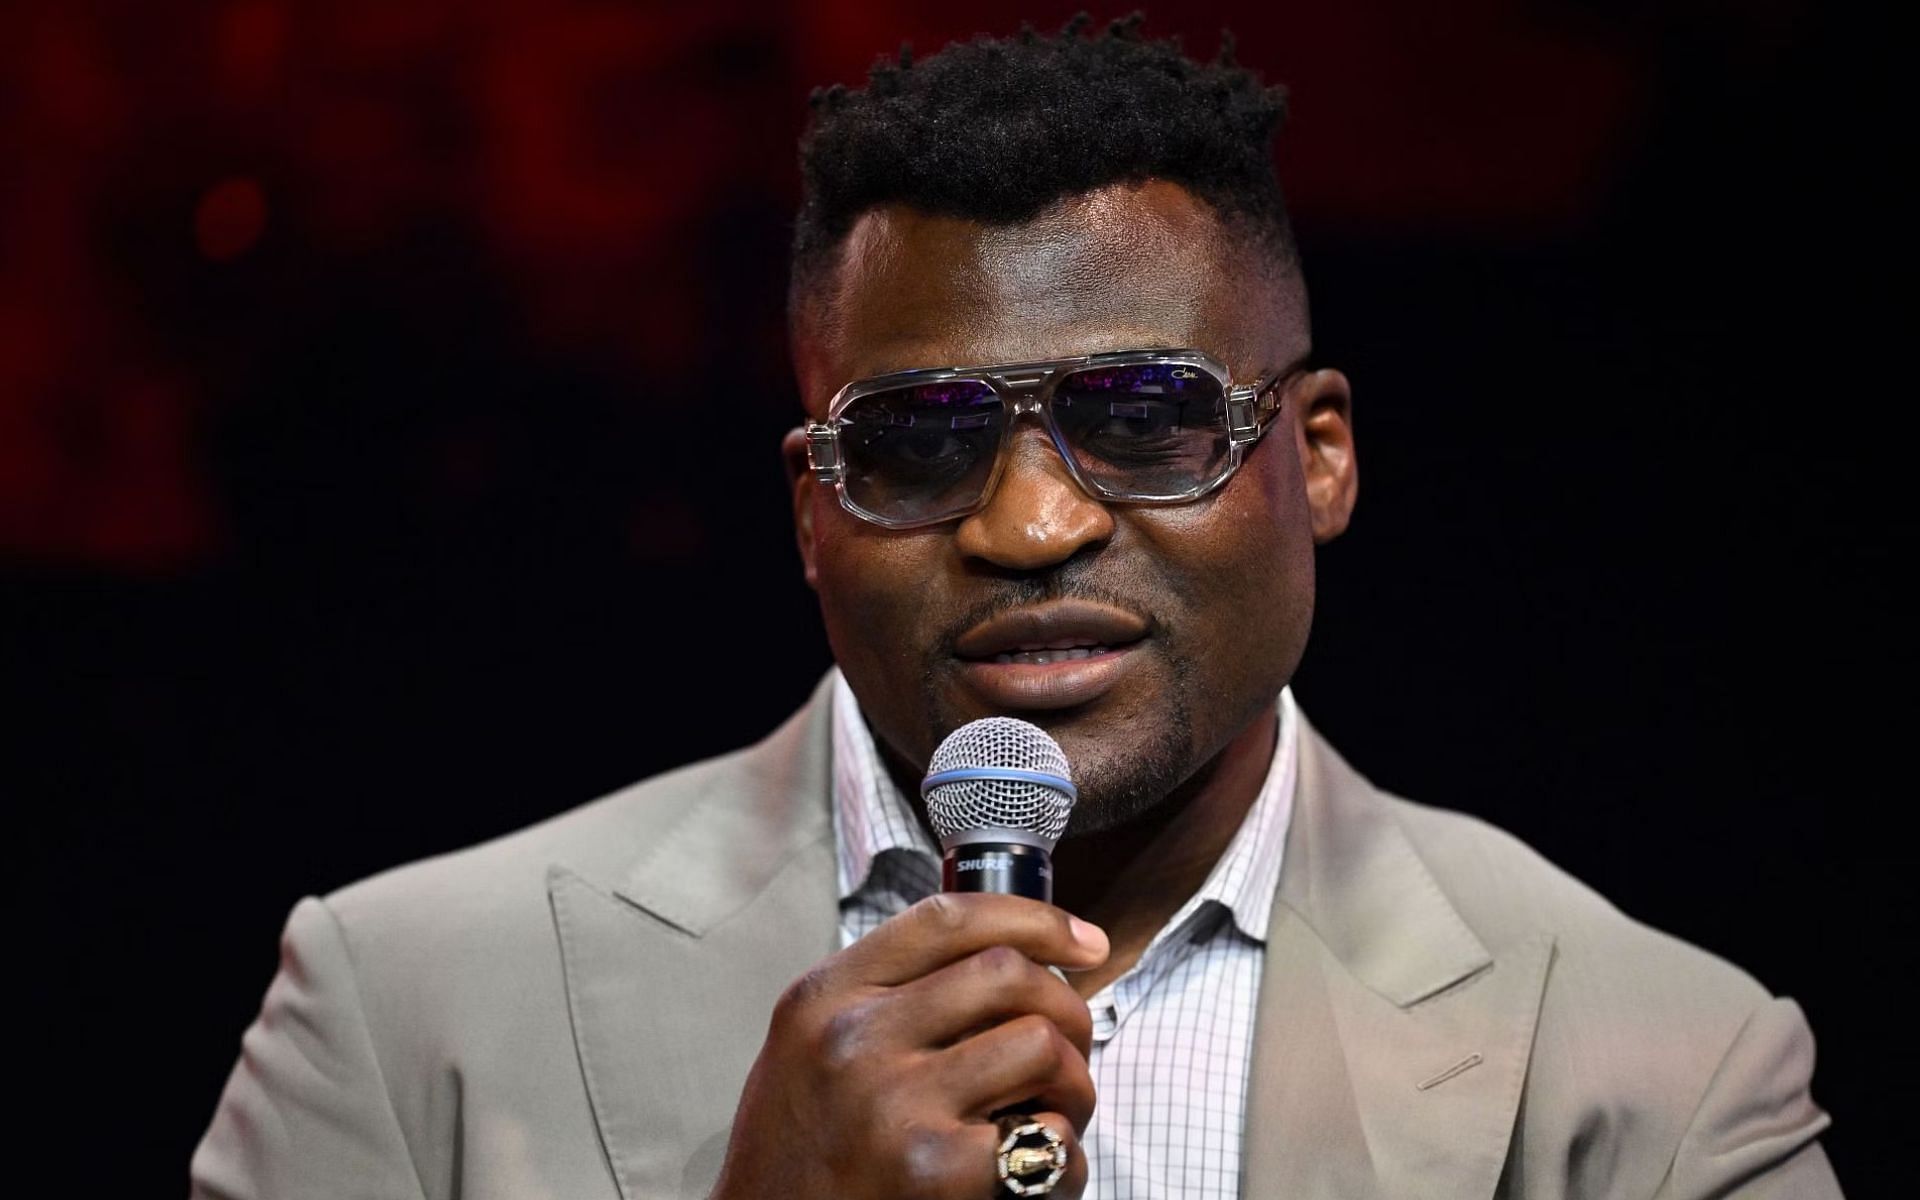 Francis Ngannou (pictured) looks back on his decision to enter professional boxing in wake of KO defeat [Image Courtesy: @GettyImages]